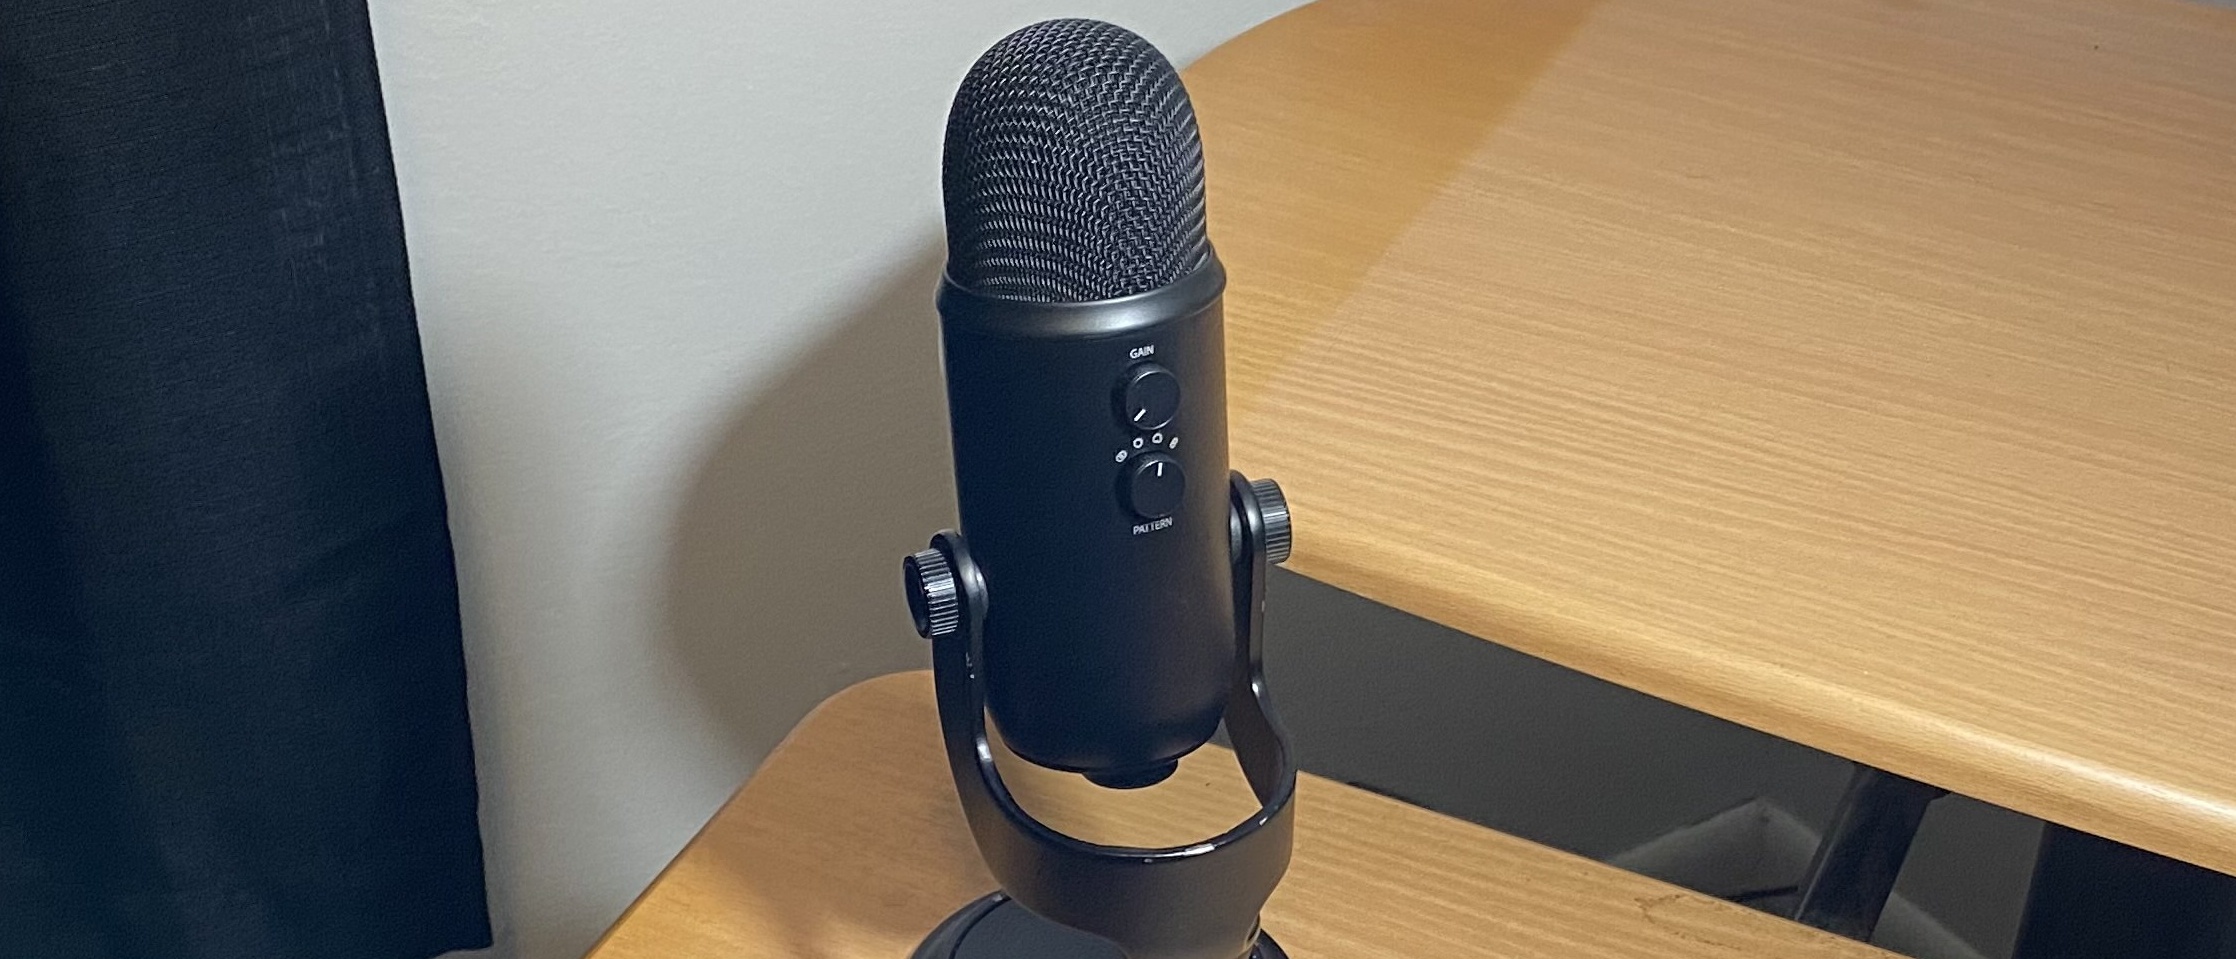 Blue Yeti microphone review